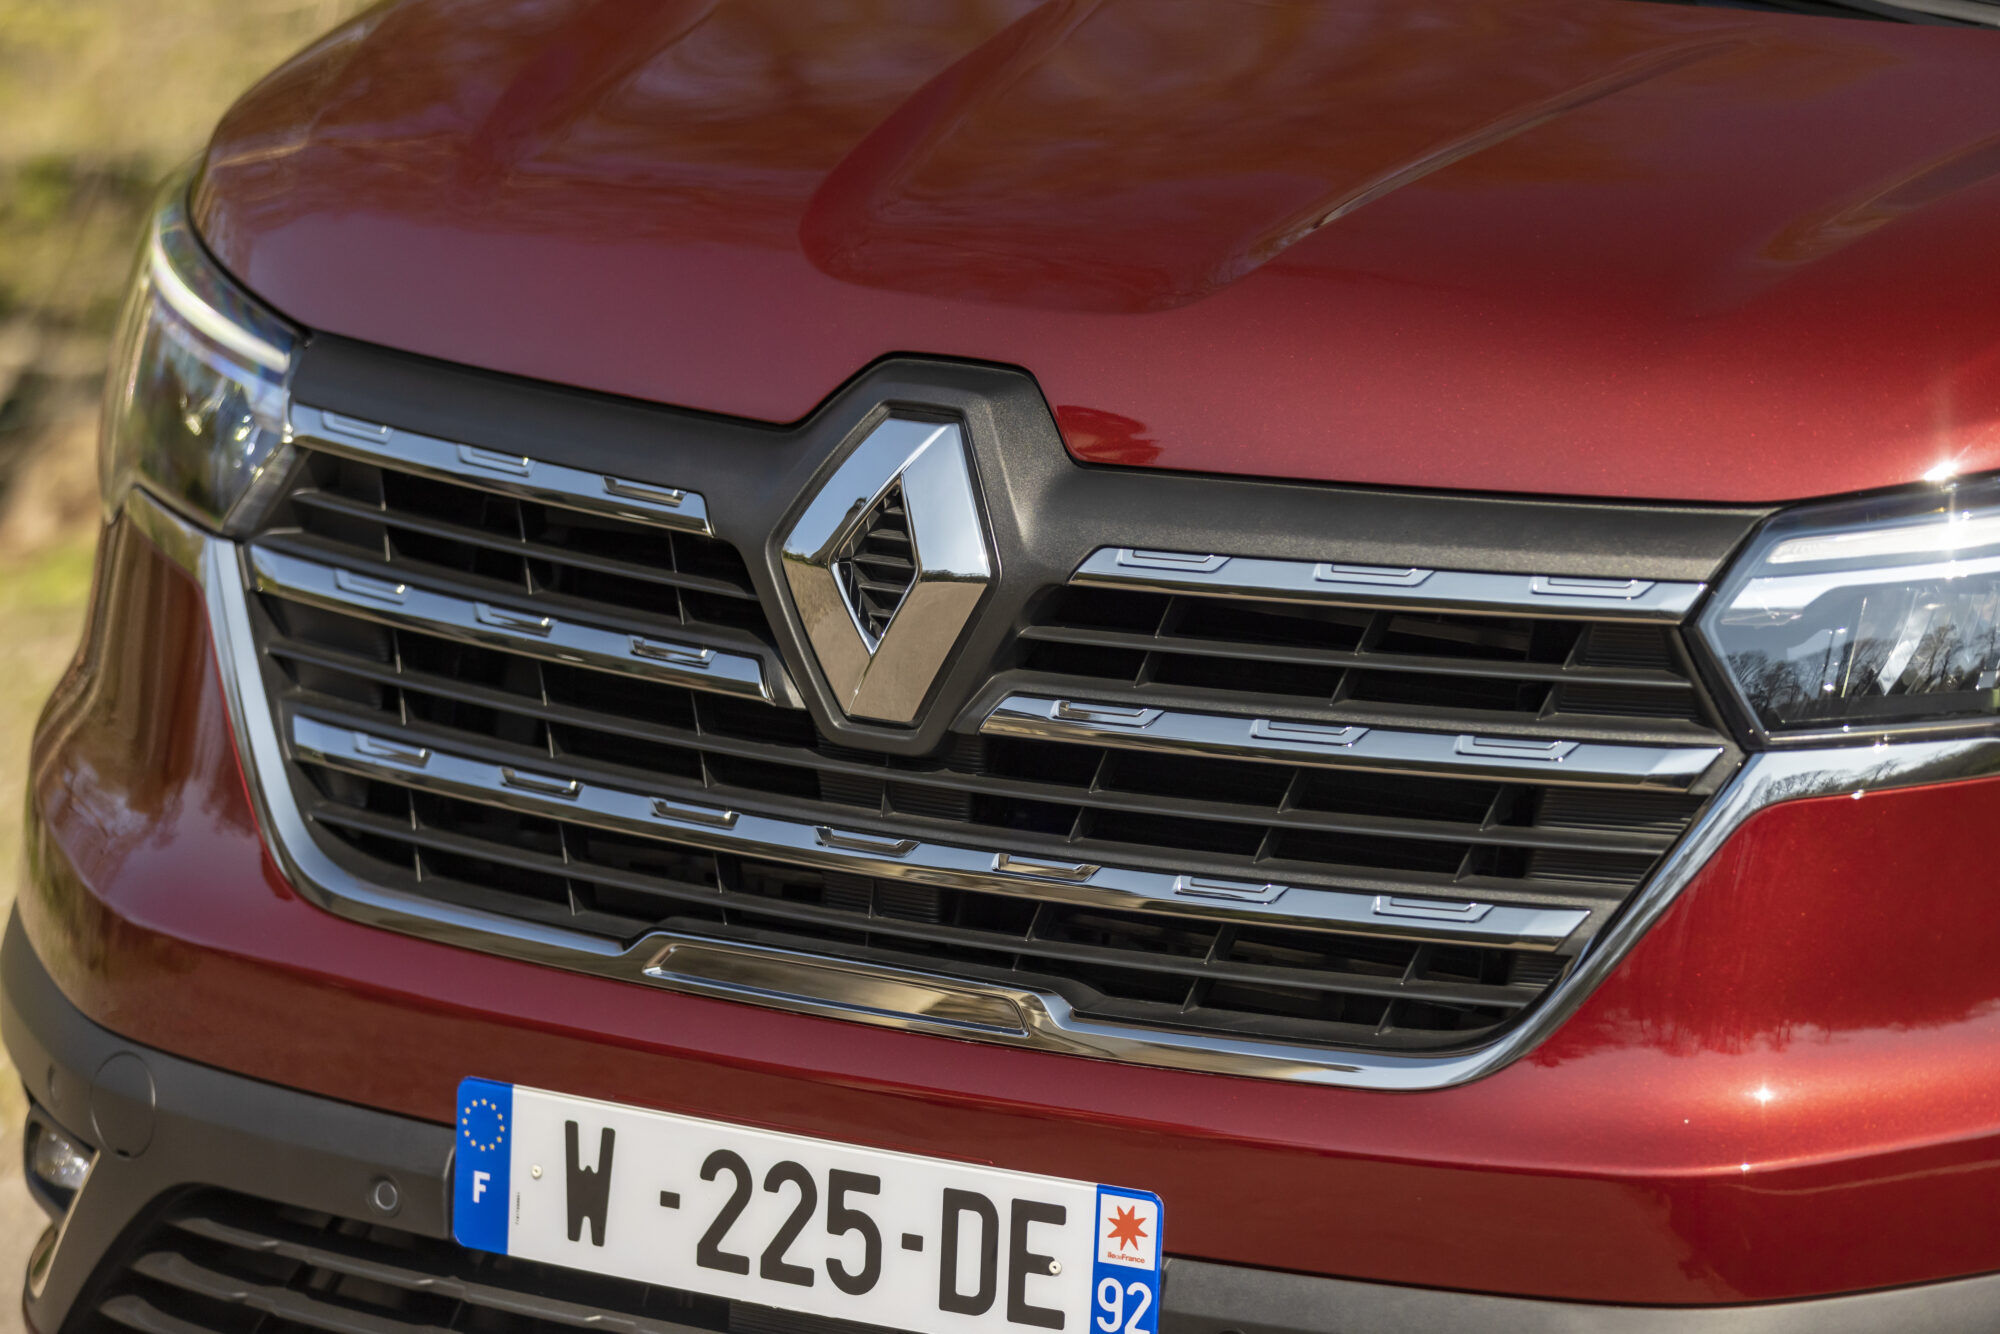 2021 - New Renault Trafic Combi - Tests drive